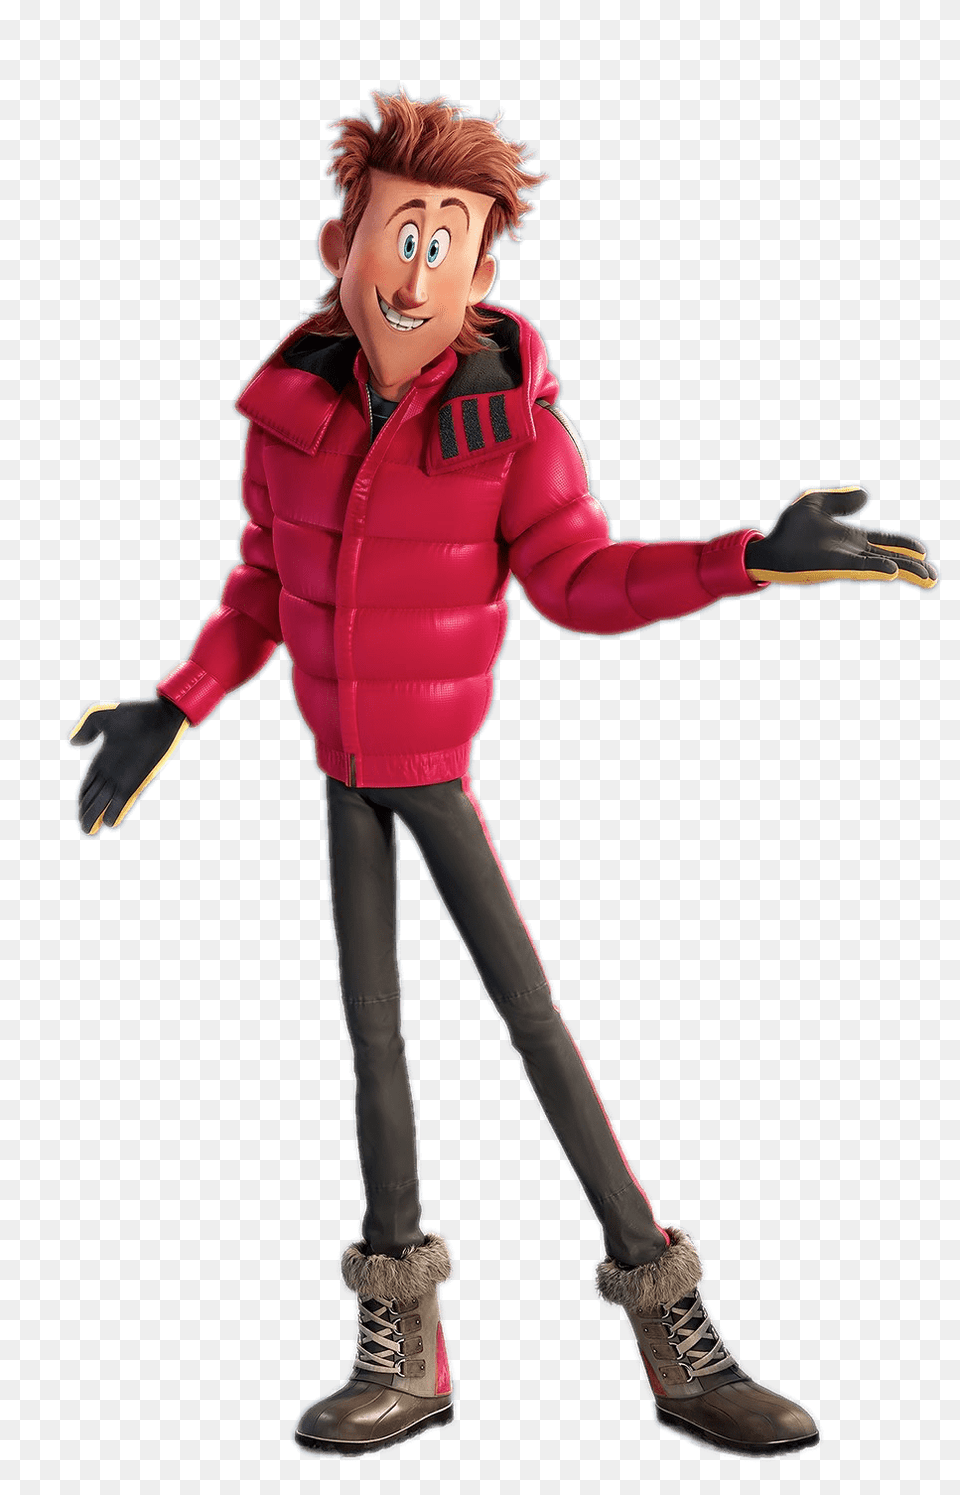 Smallfoot Percy The Filmmaker, Person, Clothing, Glove, Footwear Png Image